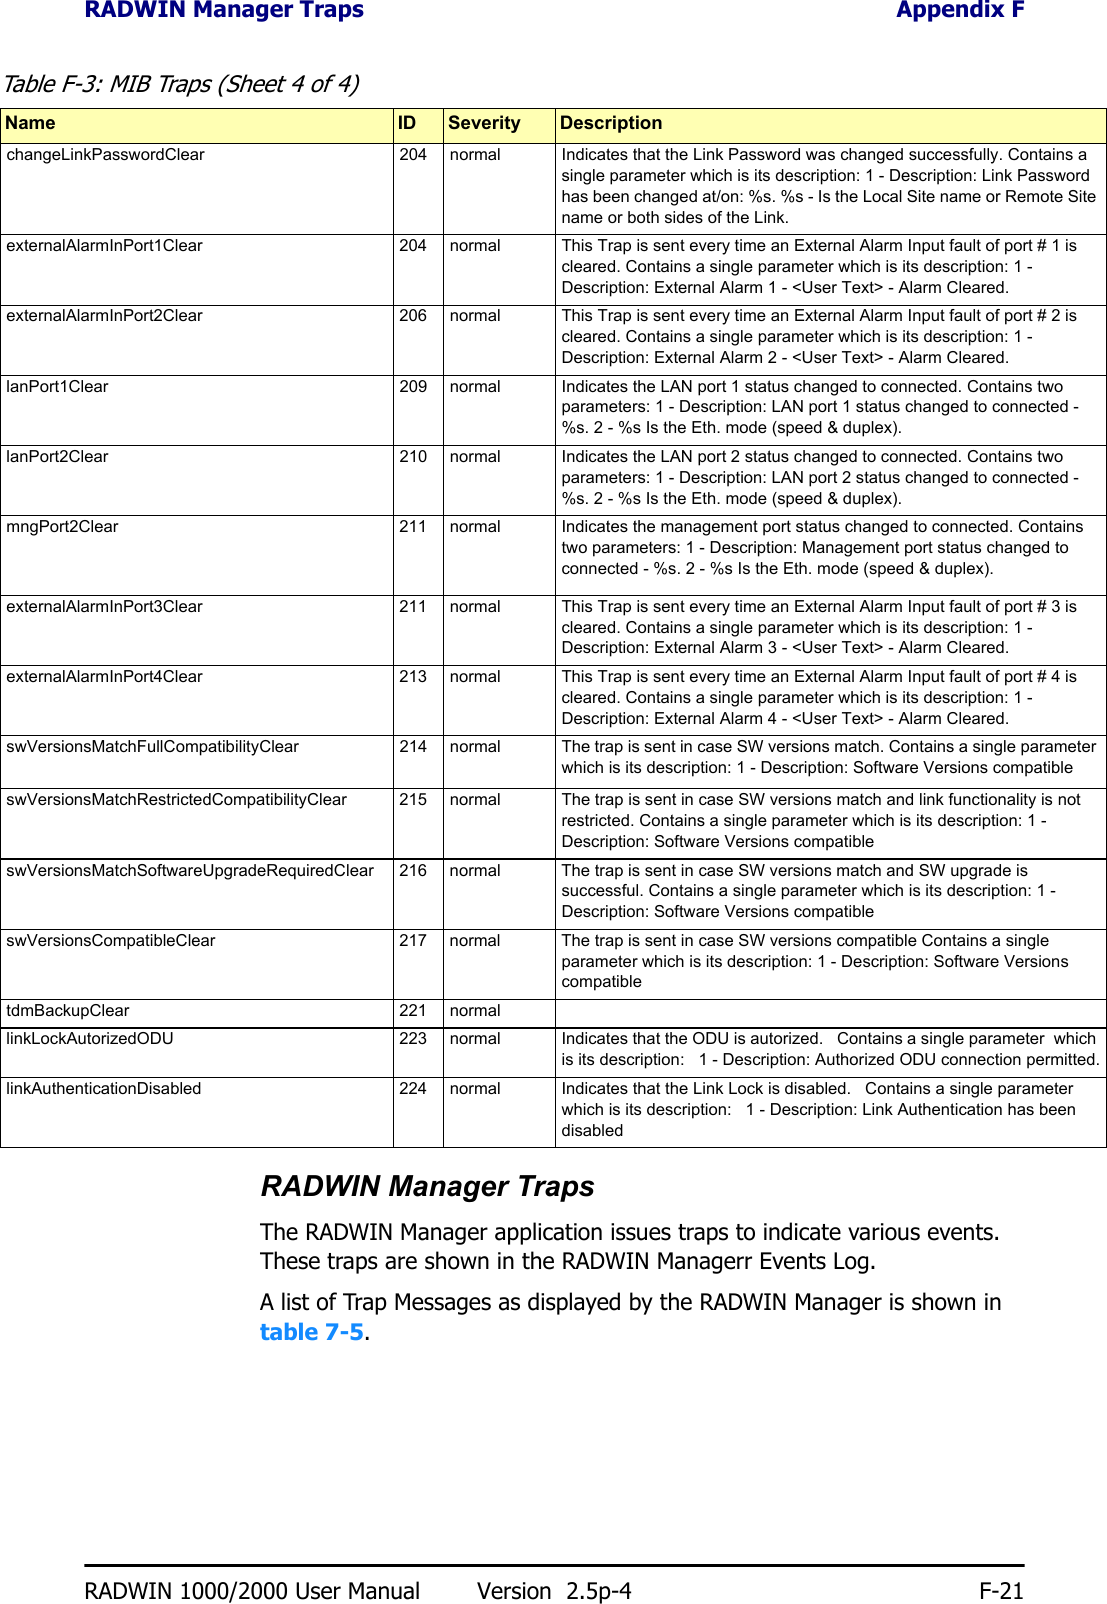 RADWIN Manager Traps Appendix FRADWIN 1000/2000 User Manual Version  2.5p-4 F-21RADWIN Manager TrapsThe RADWIN Manager application issues traps to indicate various events. These traps are shown in the RADWIN Managerr Events Log.A list of Trap Messages as displayed by the RADWIN Manager is shown in table 7-5.changeLinkPasswordClear 204 normal Indicates that the Link Password was changed successfully. Contains a single parameter which is its description: 1 - Description: Link Password has been changed at/on: %s. %s - Is the Local Site name or Remote Site name or both sides of the Link. externalAlarmInPort1Clear 204 normal This Trap is sent every time an External Alarm Input fault of port # 1 is cleared. Contains a single parameter which is its description: 1 - Description: External Alarm 1 - &lt;User Text&gt; - Alarm Cleared. externalAlarmInPort2Clear 206 normal This Trap is sent every time an External Alarm Input fault of port # 2 is cleared. Contains a single parameter which is its description: 1 - Description: External Alarm 2 - &lt;User Text&gt; - Alarm Cleared. lanPort1Clear 209 normal Indicates the LAN port 1 status changed to connected. Contains two parameters: 1 - Description: LAN port 1 status changed to connected - %s. 2 - %s Is the Eth. mode (speed &amp; duplex). lanPort2Clear 210 normal Indicates the LAN port 2 status changed to connected. Contains two parameters: 1 - Description: LAN port 2 status changed to connected - %s. 2 - %s Is the Eth. mode (speed &amp; duplex). mngPort2Clear 211 normal Indicates the management port status changed to connected. Contains two parameters: 1 - Description: Management port status changed to connected - %s. 2 - %s Is the Eth. mode (speed &amp; duplex). externalAlarmInPort3Clear 211 normal This Trap is sent every time an External Alarm Input fault of port # 3 is cleared. Contains a single parameter which is its description: 1 - Description: External Alarm 3 - &lt;User Text&gt; - Alarm Cleared. externalAlarmInPort4Clear 213 normal This Trap is sent every time an External Alarm Input fault of port # 4 is cleared. Contains a single parameter which is its description: 1 - Description: External Alarm 4 - &lt;User Text&gt; - Alarm Cleared. swVersionsMatchFullCompatibilityClear 214 normal The trap is sent in case SW versions match. Contains a single parameter which is its description: 1 - Description: Software Versions compatible swVersionsMatchRestrictedCompatibilityClear 215 normal The trap is sent in case SW versions match and link functionality is not restricted. Contains a single parameter which is its description: 1 - Description: Software Versions compatible swVersionsMatchSoftwareUpgradeRequiredClear 216 normal The trap is sent in case SW versions match and SW upgrade is successful. Contains a single parameter which is its description: 1 - Description: Software Versions compatible swVersionsCompatibleClear 217 normal The trap is sent in case SW versions compatible Contains a single parameter which is its description: 1 - Description: Software Versions compatible tdmBackupClear 221 normallinkLockAutorizedODU 223 normal Indicates that the ODU is autorized.  Contains a single parameter  which is its description:  1 - Description: Authorized ODU connection permitted.linkAuthenticationDisabled 224 normal Indicates that the Link Lock is disabled.  Contains a single parameter  which is its description:  1 - Description: Link Authentication has been disabledTable F-3: MIB Traps (Sheet 4 of 4)Name ID Severity Description